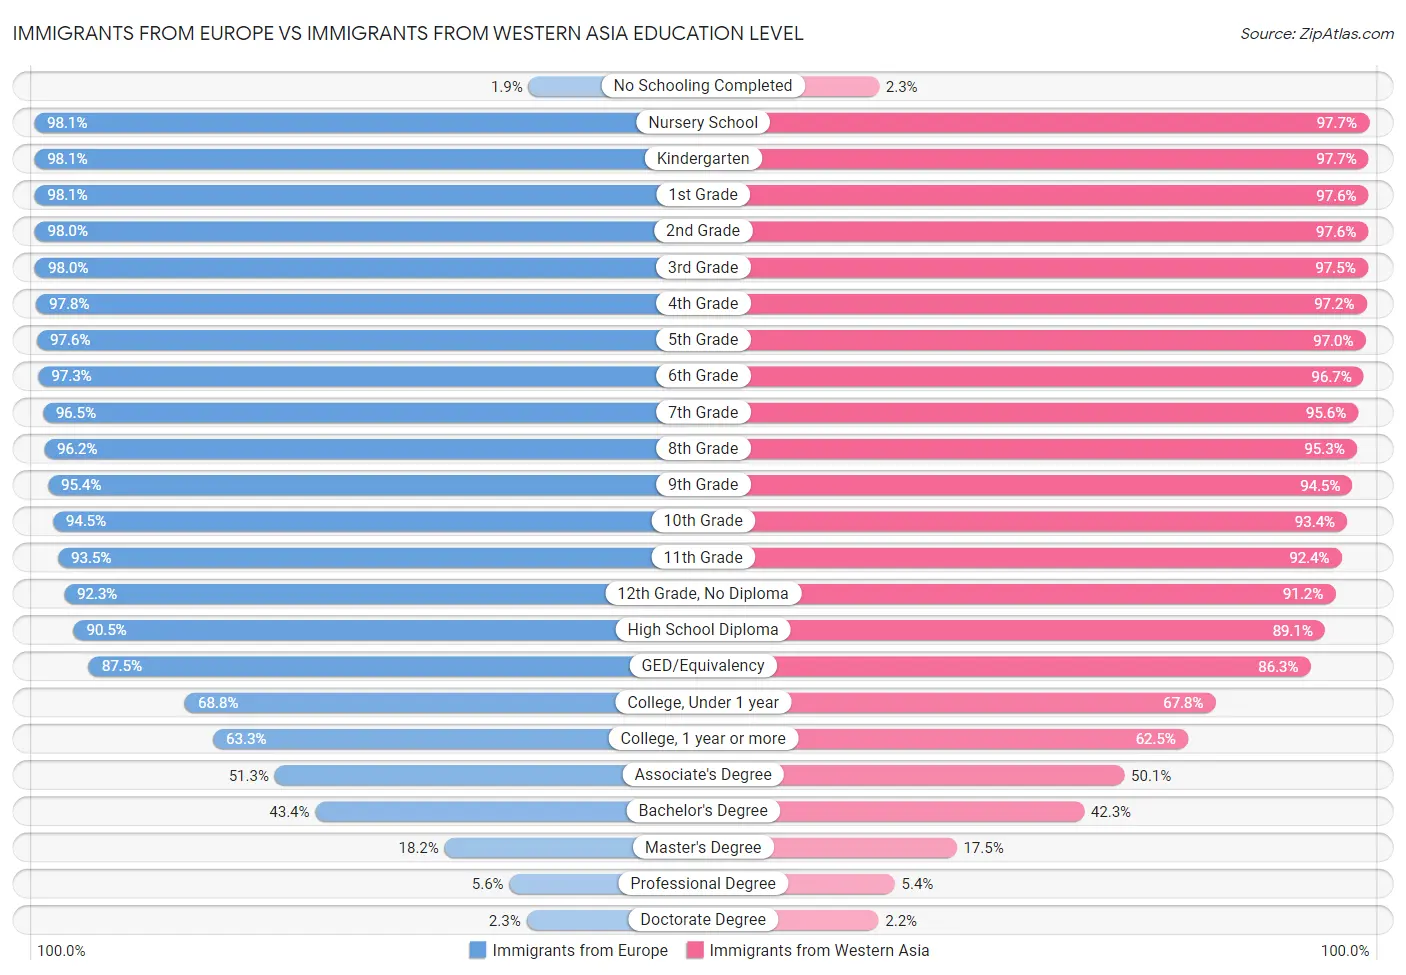 Immigrants from Europe vs Immigrants from Western Asia Education Level